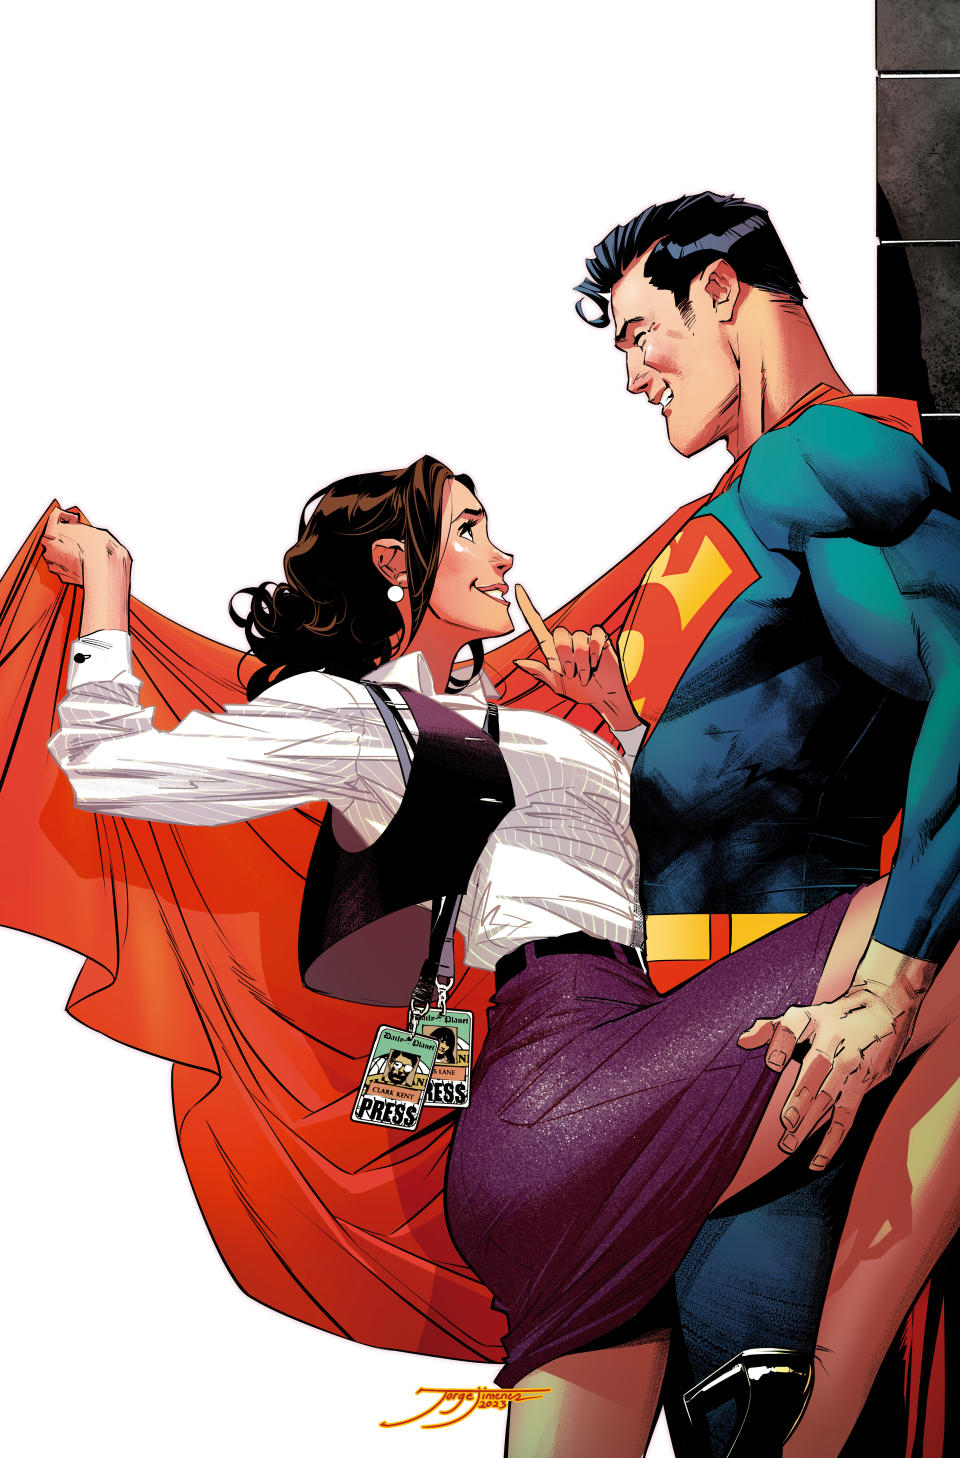 Art from Action Comics #1061